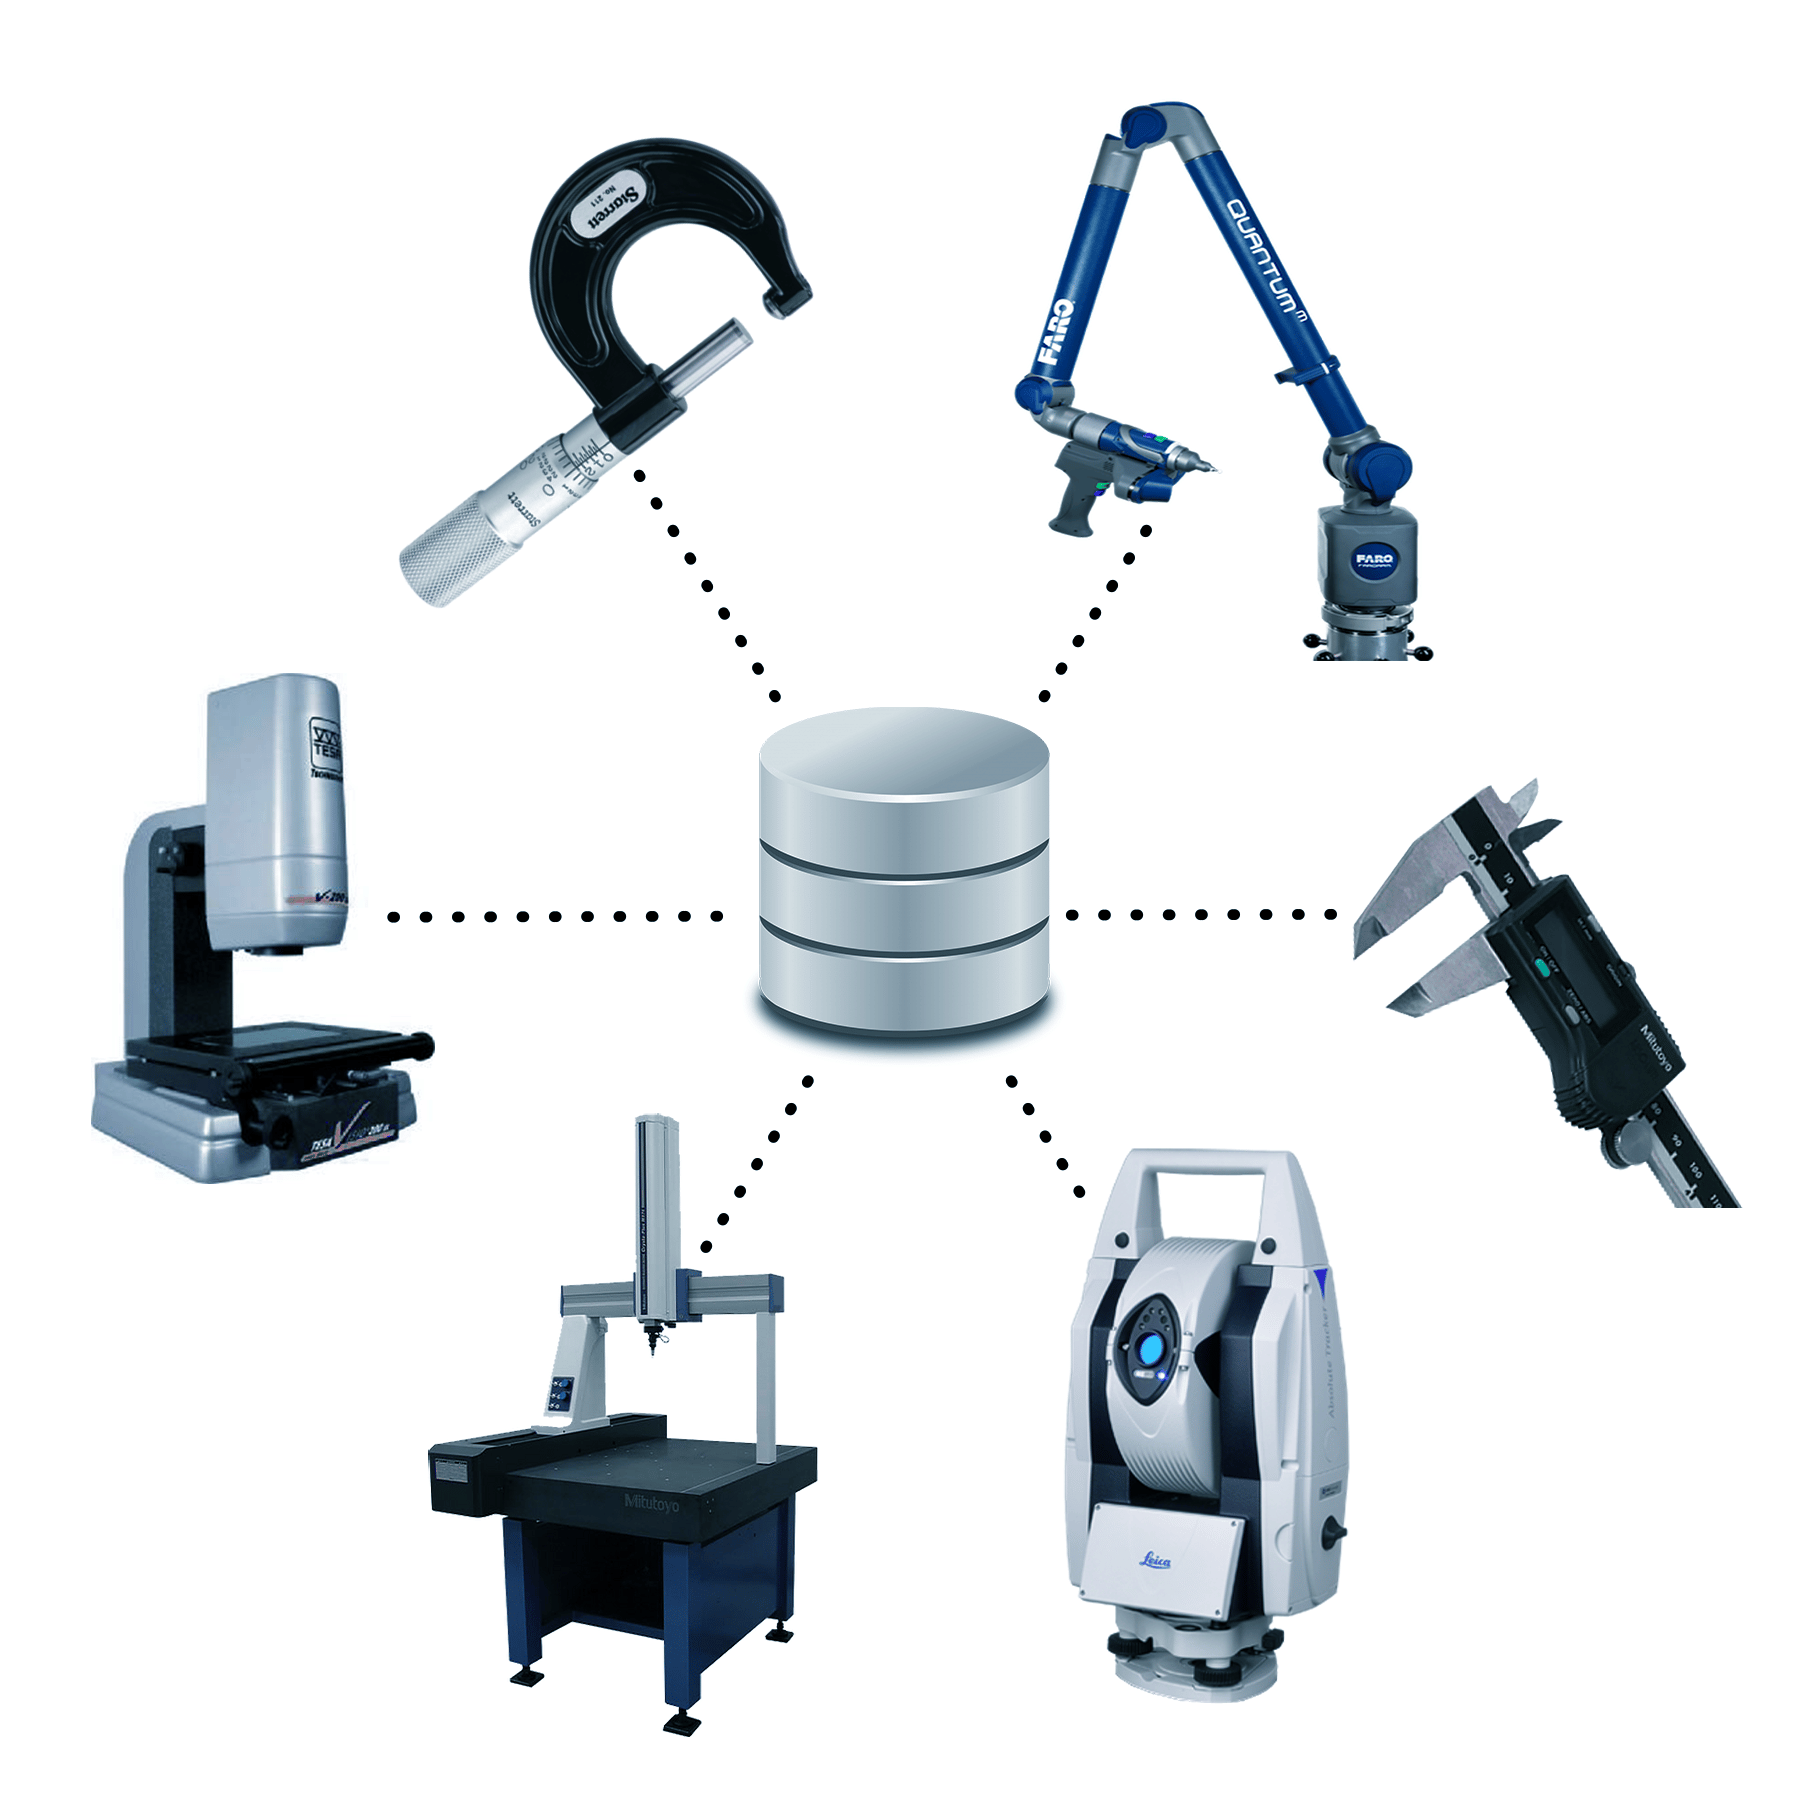 High QA Connecting Measuring Devices